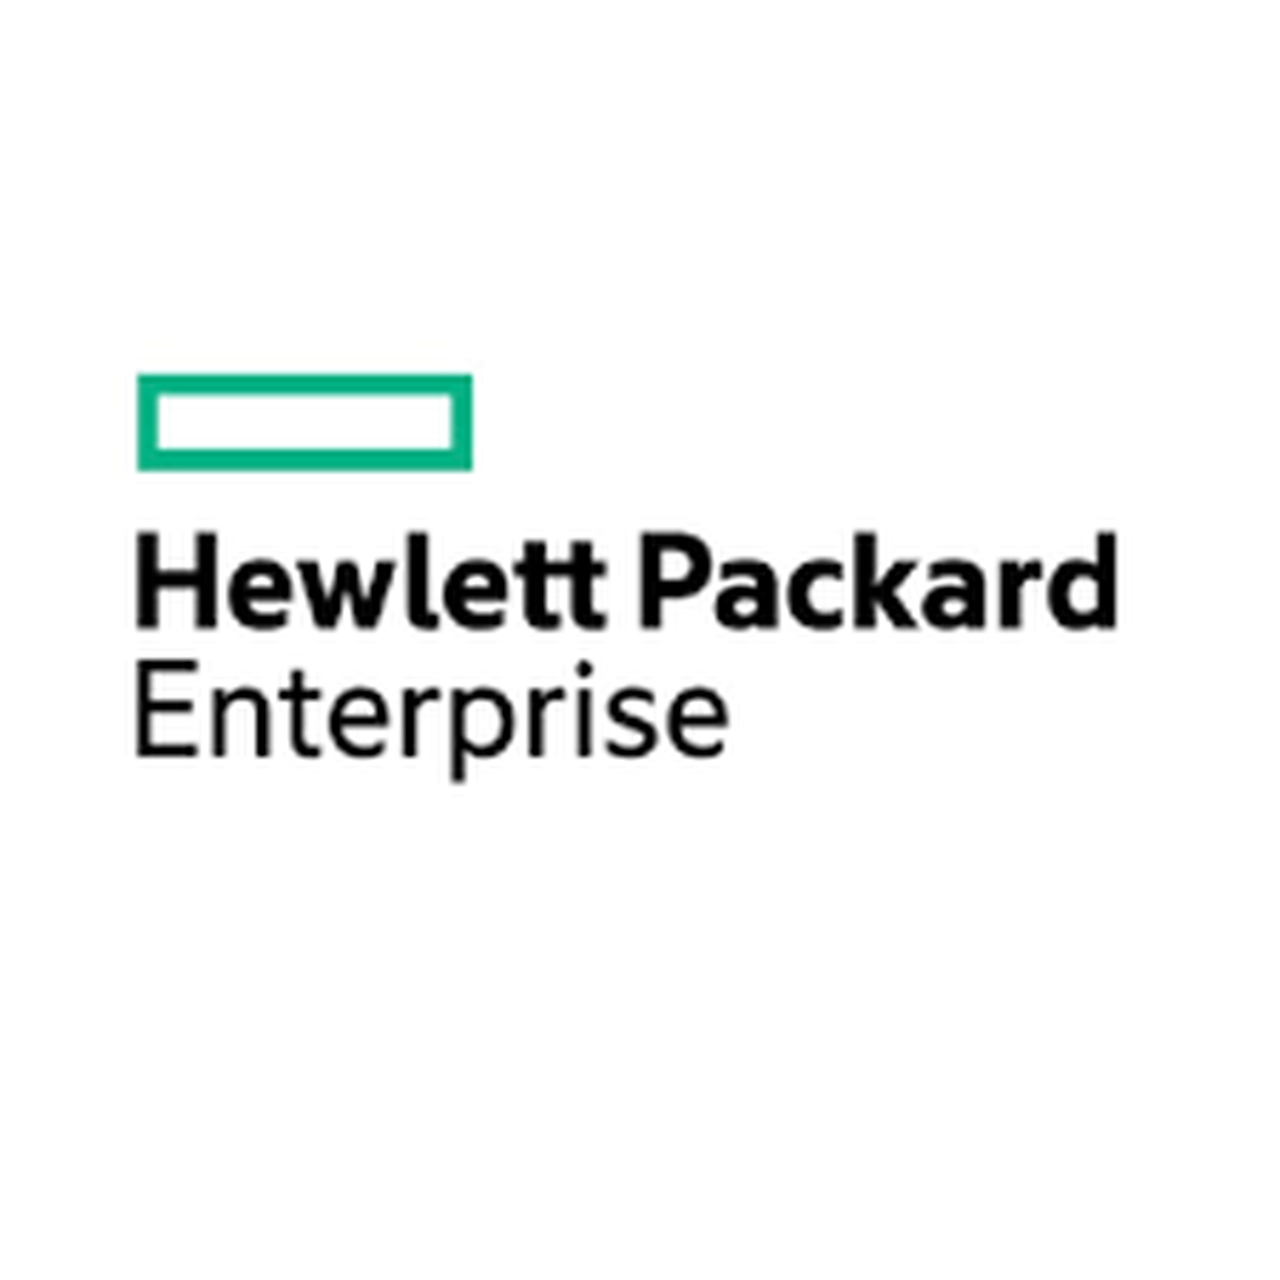 HPE 1 Year Post Warranty Proactive Care, 24x7 BL465cG6 Service